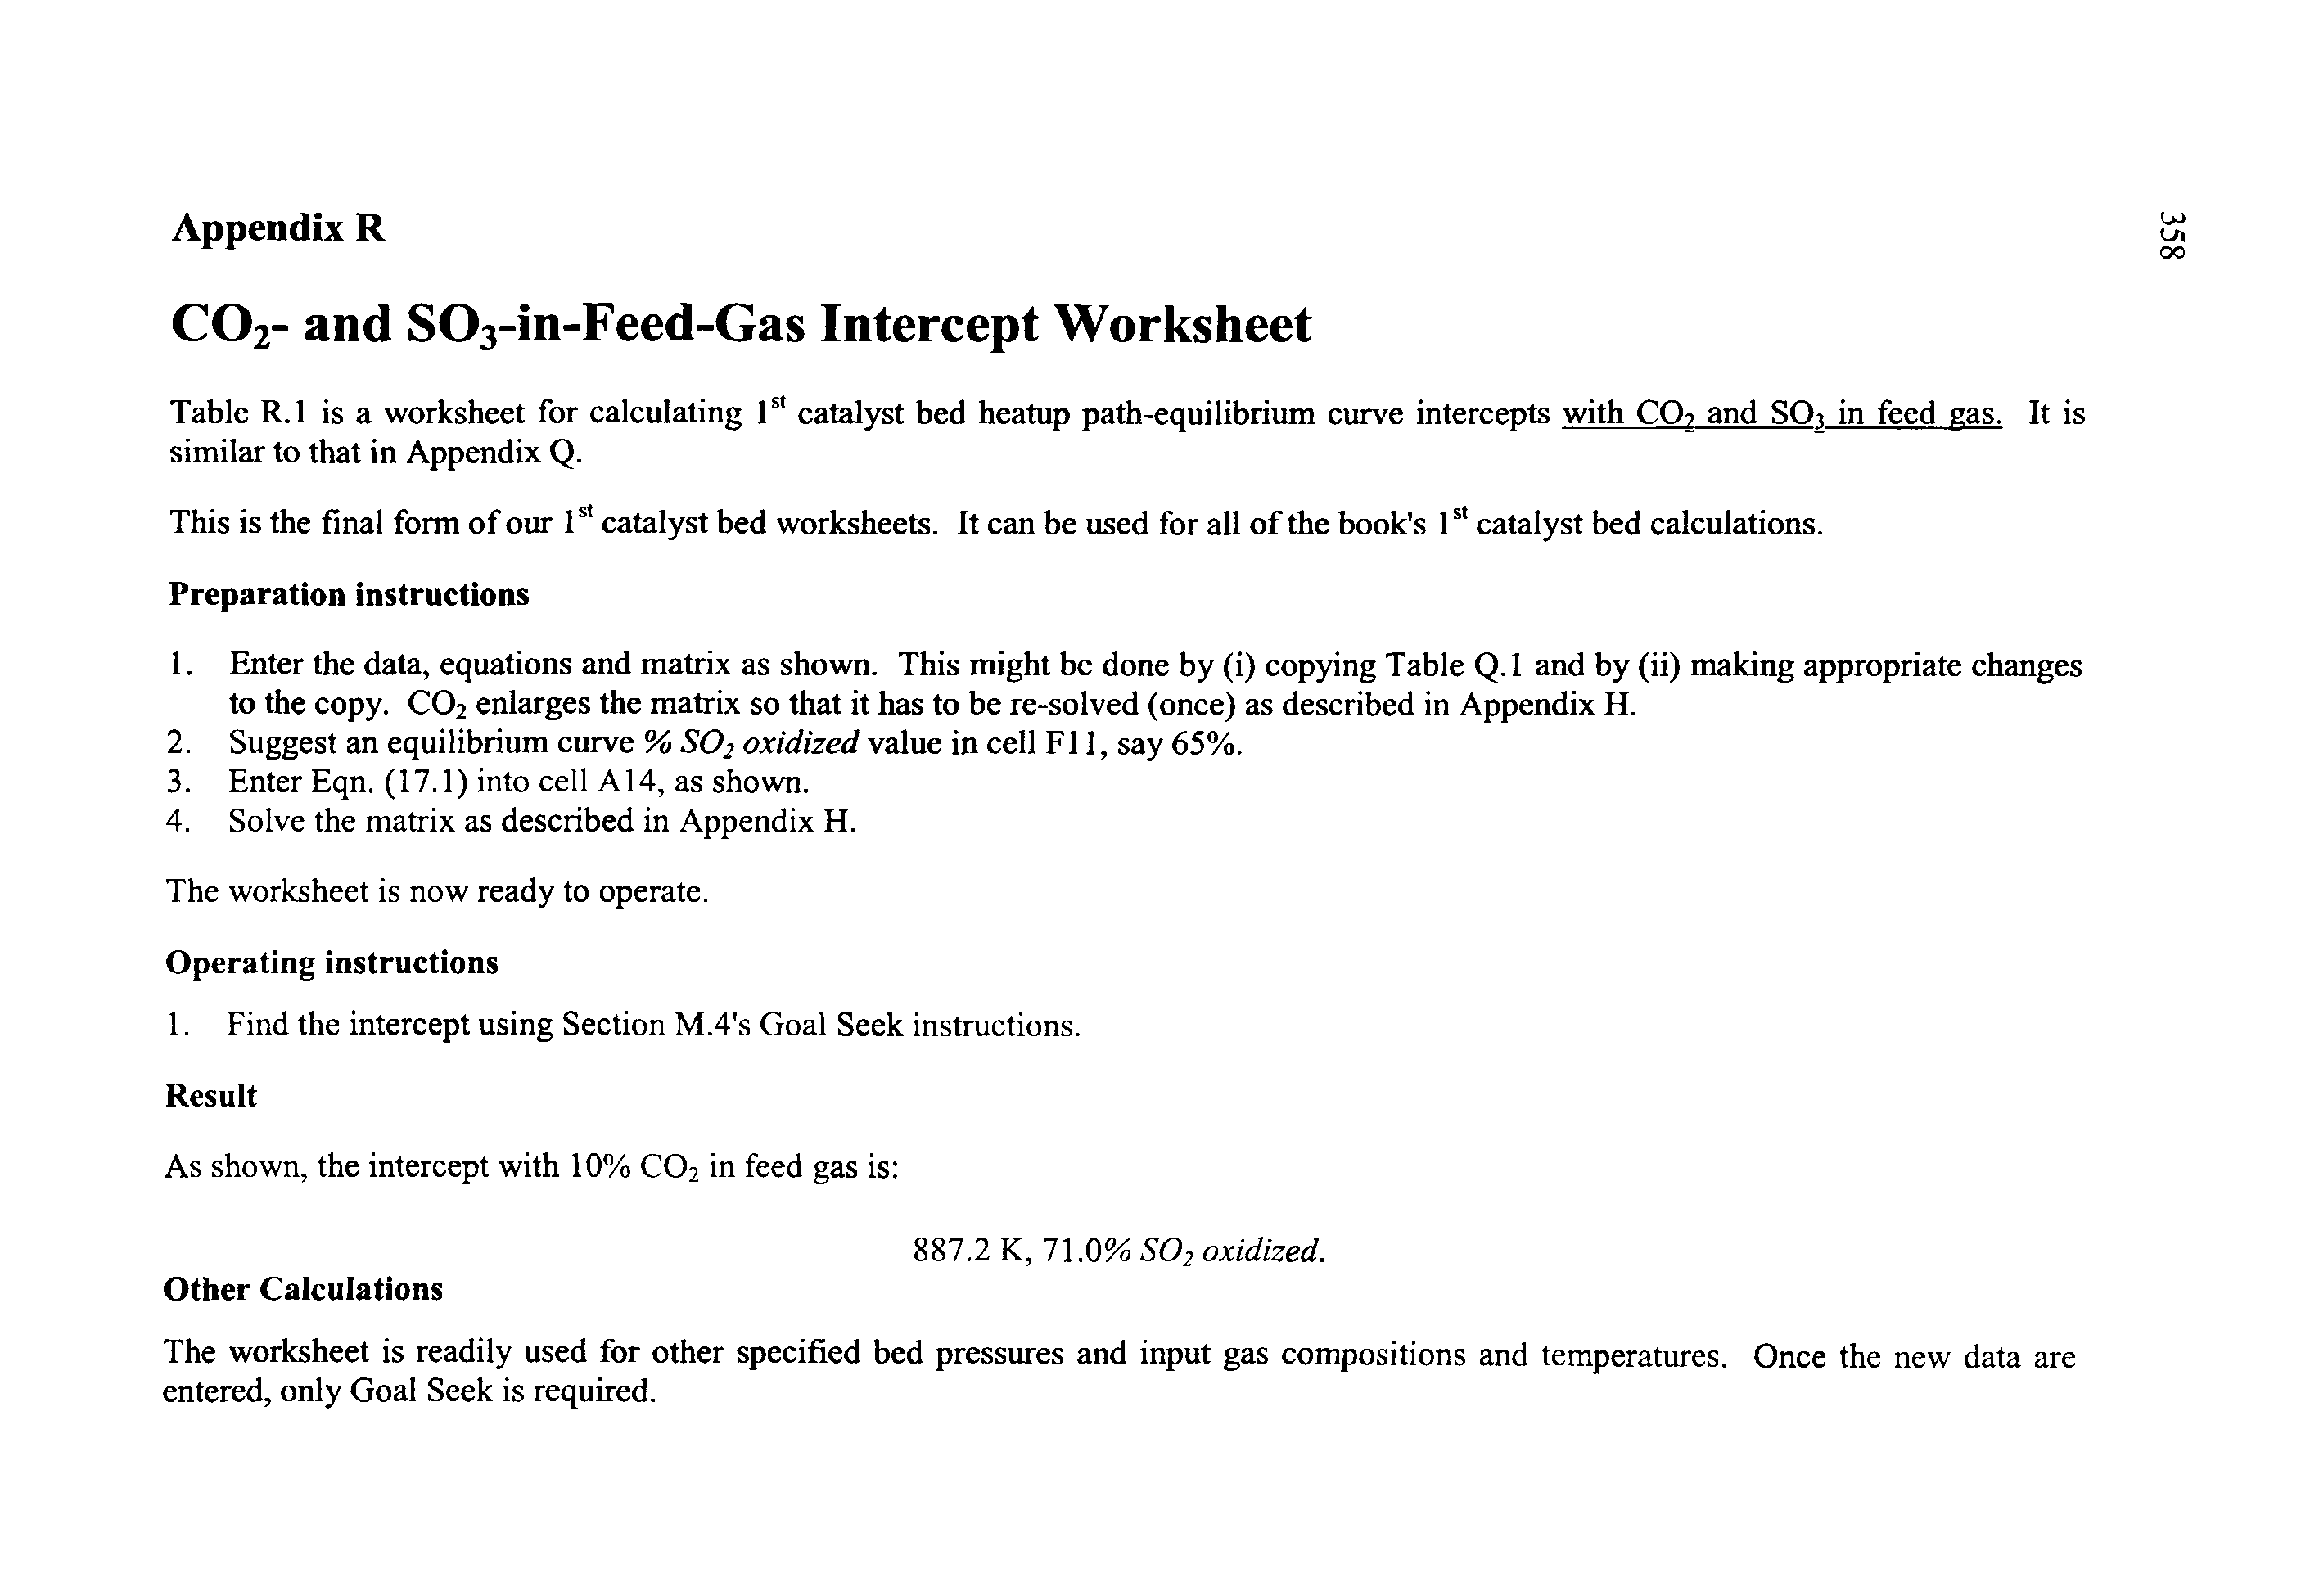 Table R.1 is a worksheet for calculating 1st catalyst bed heatup path-equilibrium curve intercepts with CO and SO in feed gas. It is similar to that in Appendix Q.